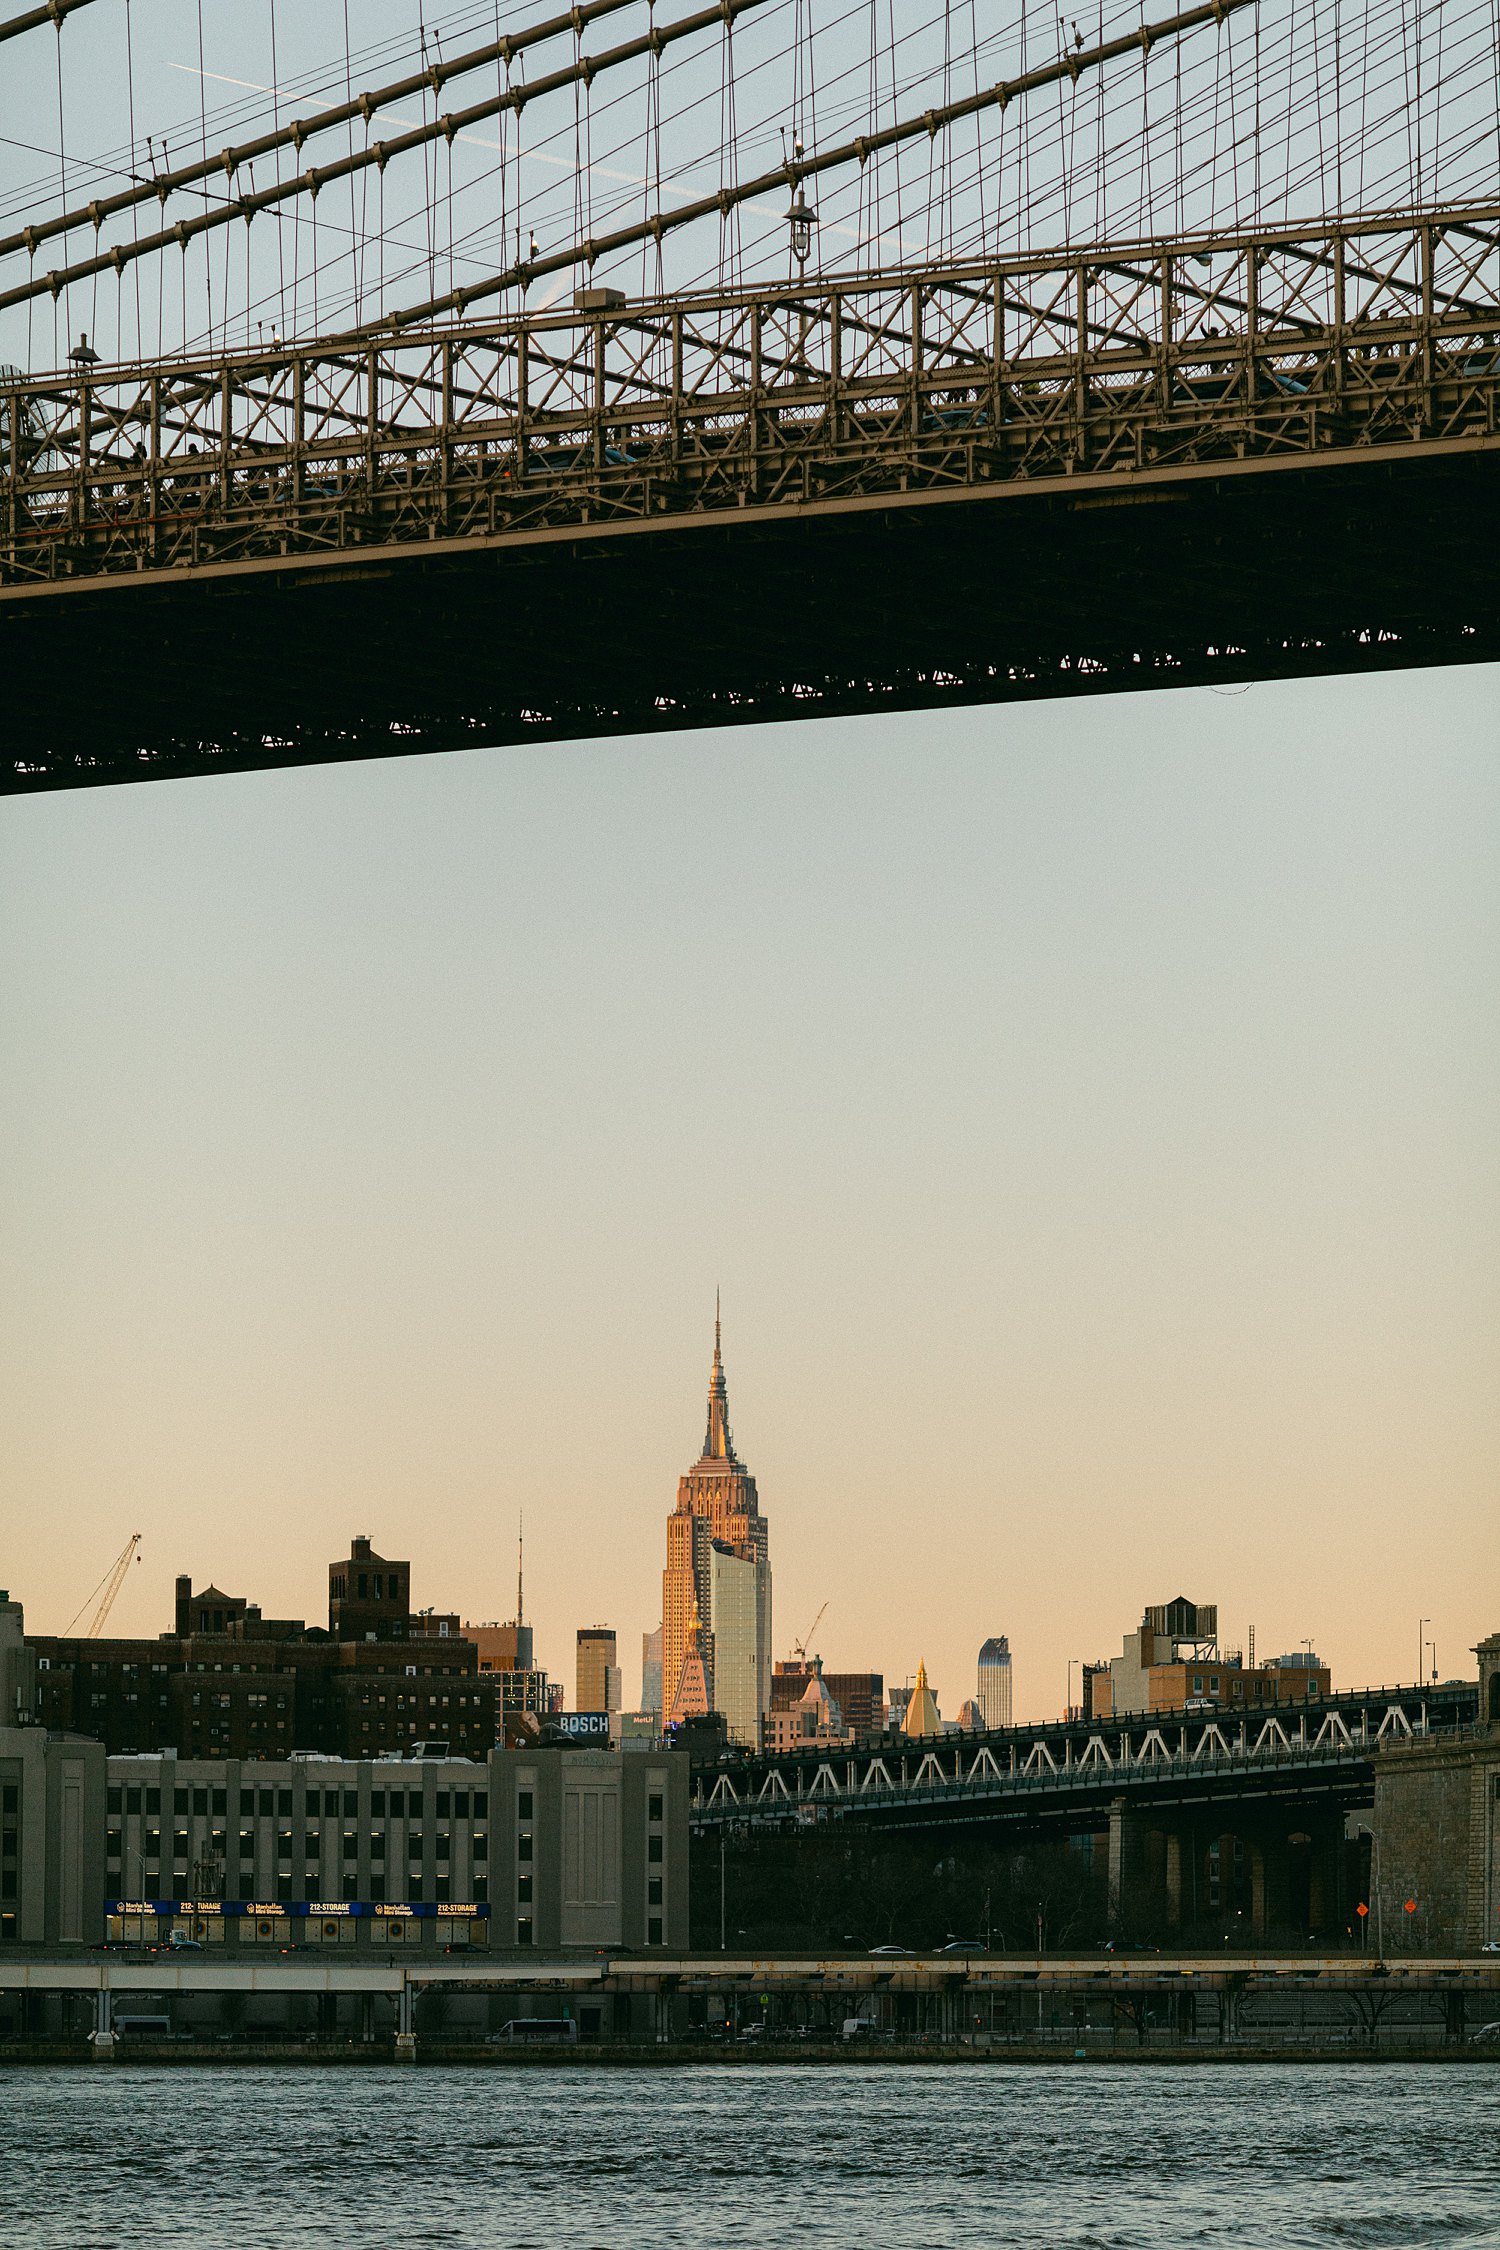 Empire State Building from the Brooklyn Bridge at sunset